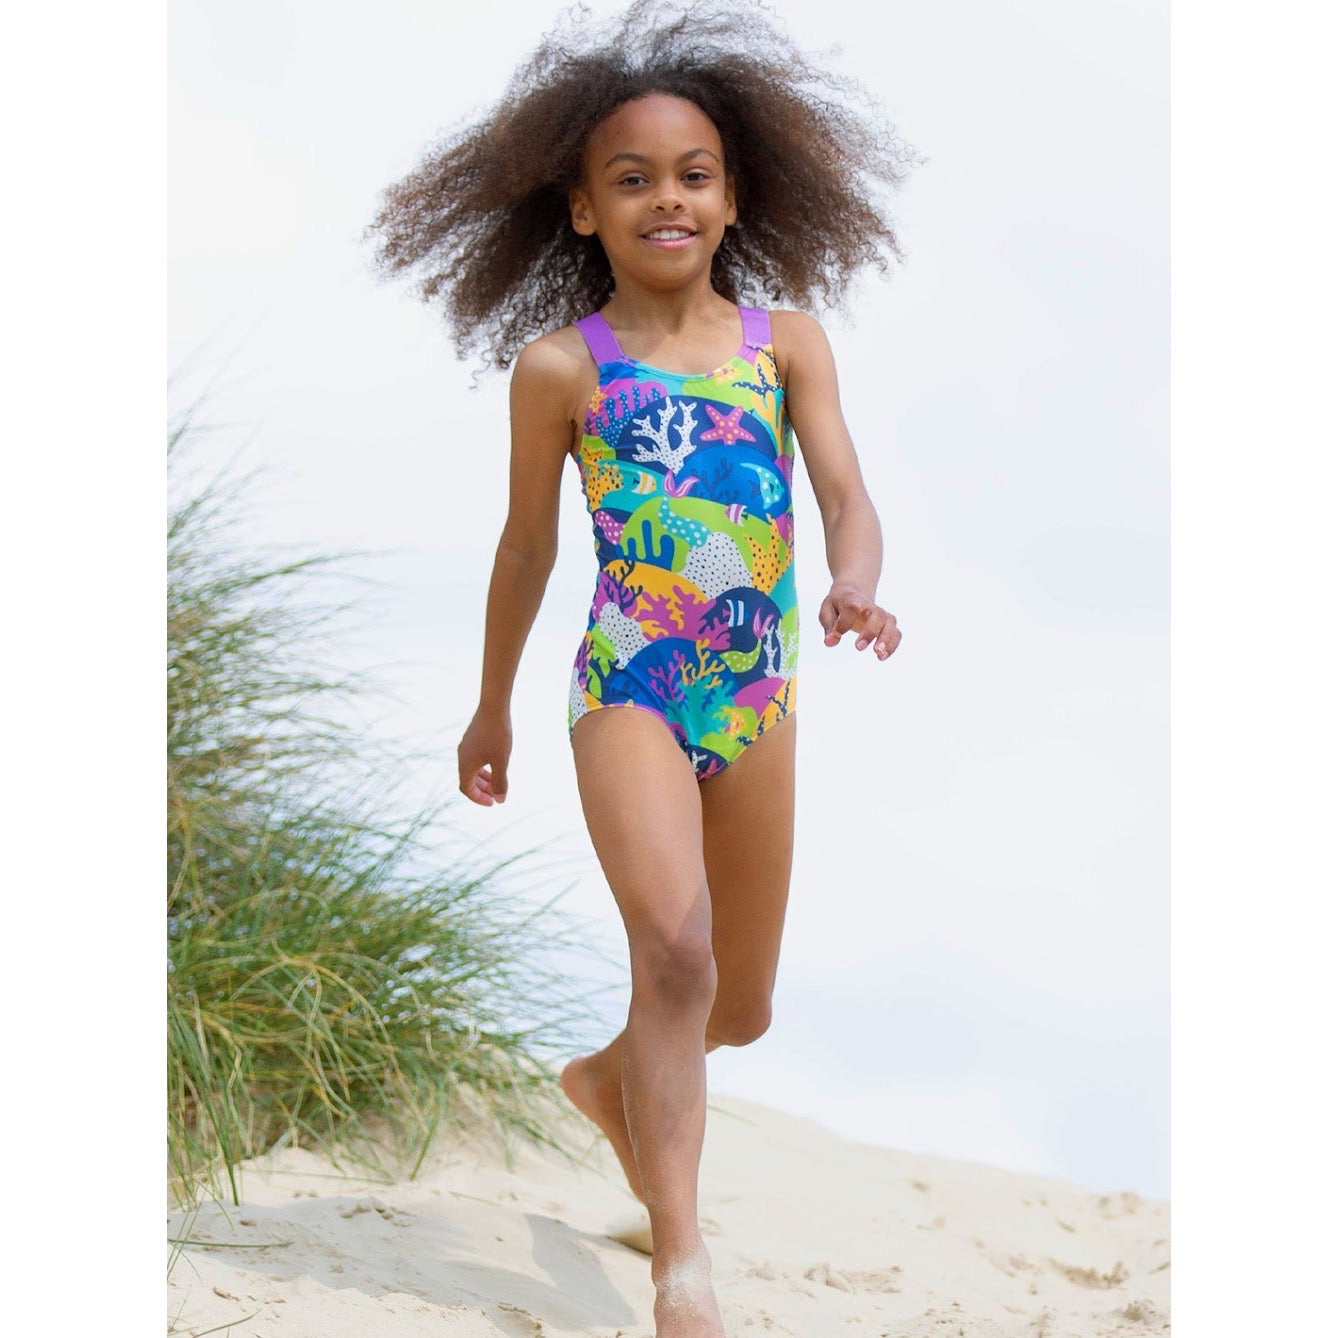 Kite Coral Reef Swimsuit T125 Clothing 3YRS / Multi,4YRS / Multi,5YRS / Multi,6YRS / Multi,7YRS / Multi,8YRS / Multi